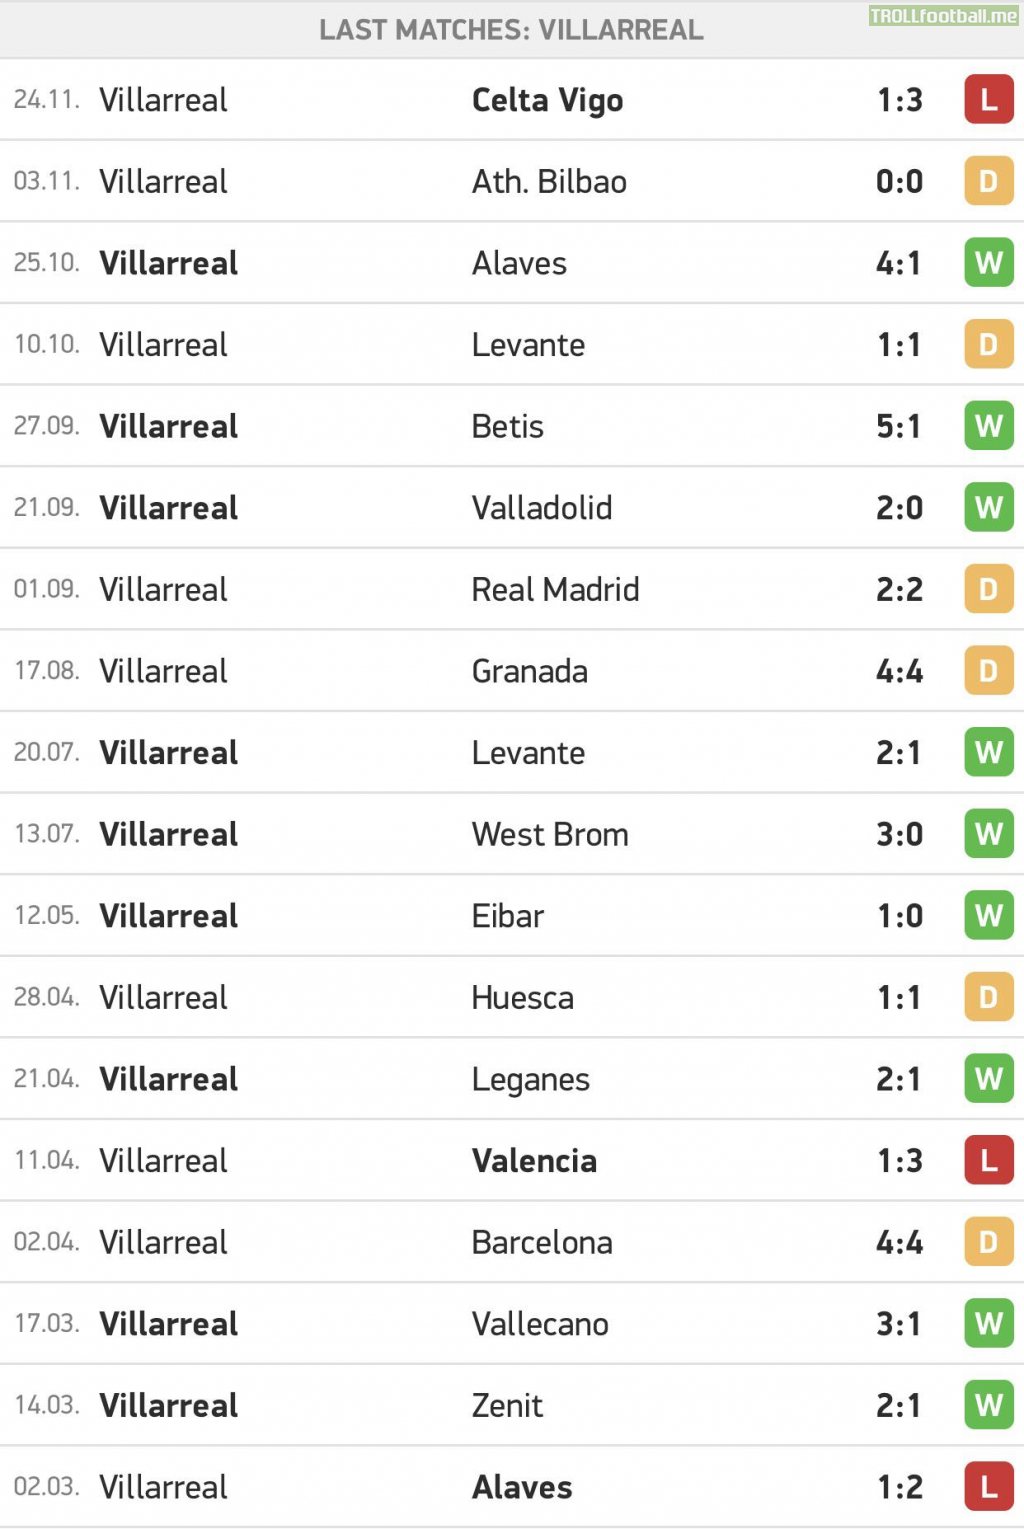 Villarreal have been pretty good at home, dating back to March.